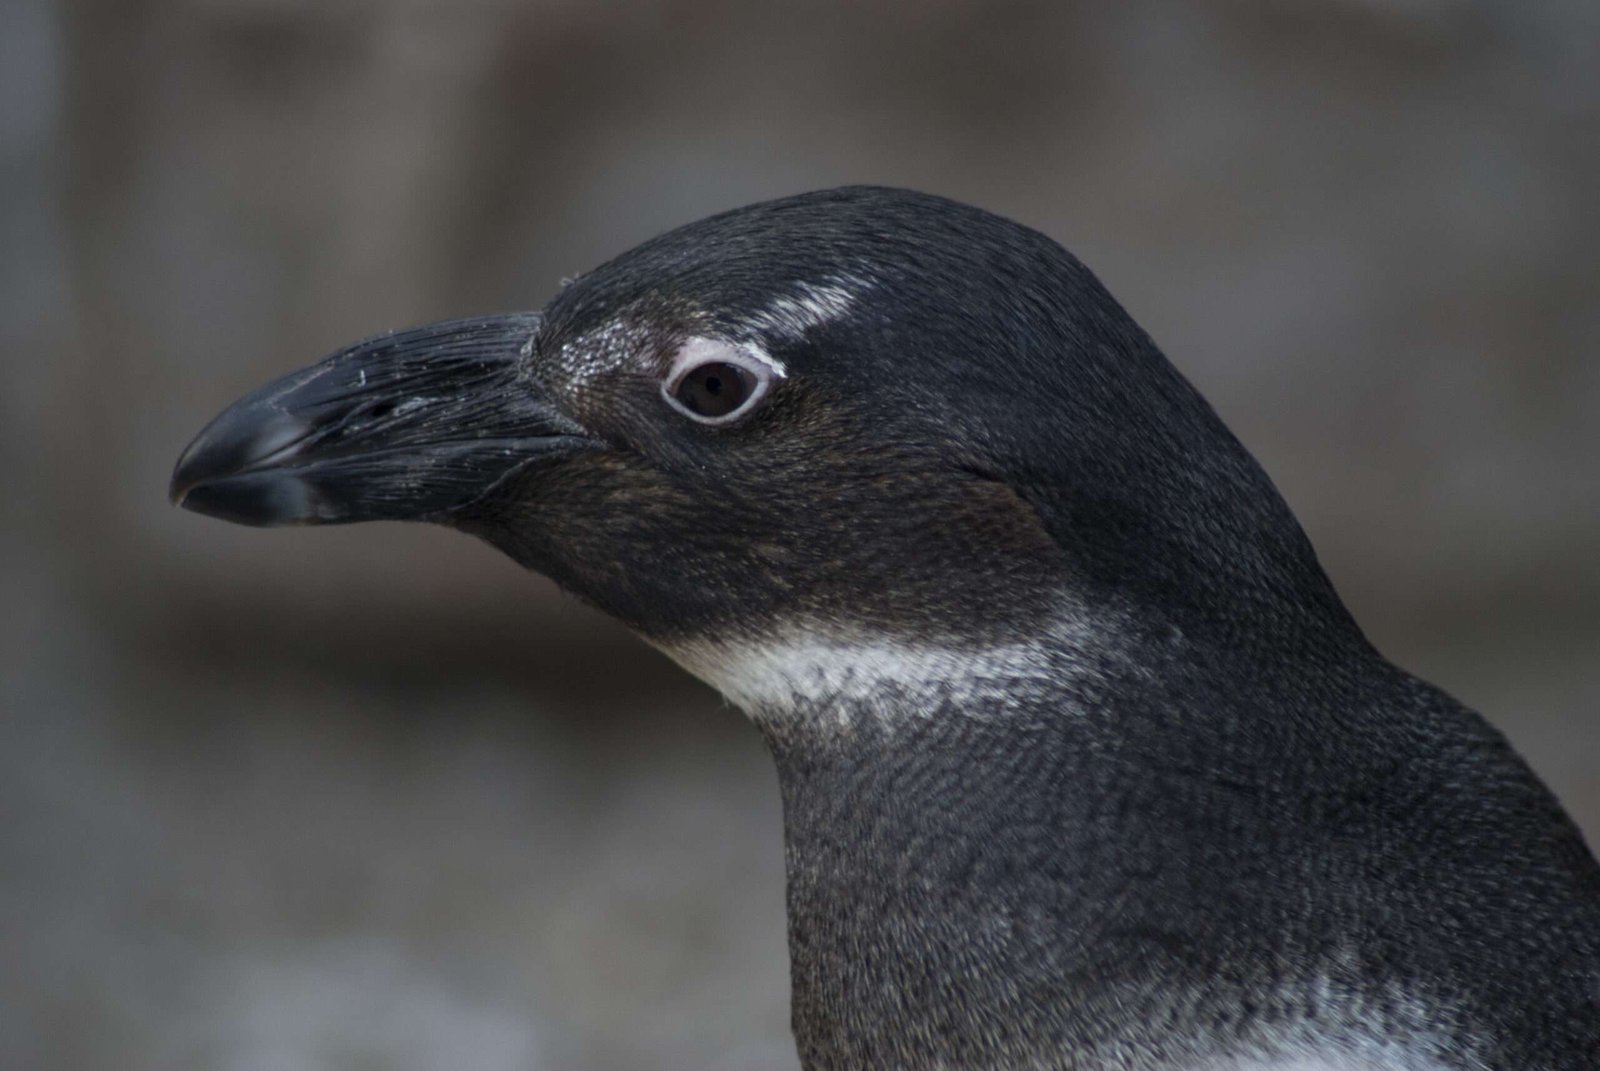 A close shot of a pinguin at the zoo. Ghost wasn't in the mood to travel to Antarctica to photograph them in their natural habitat.